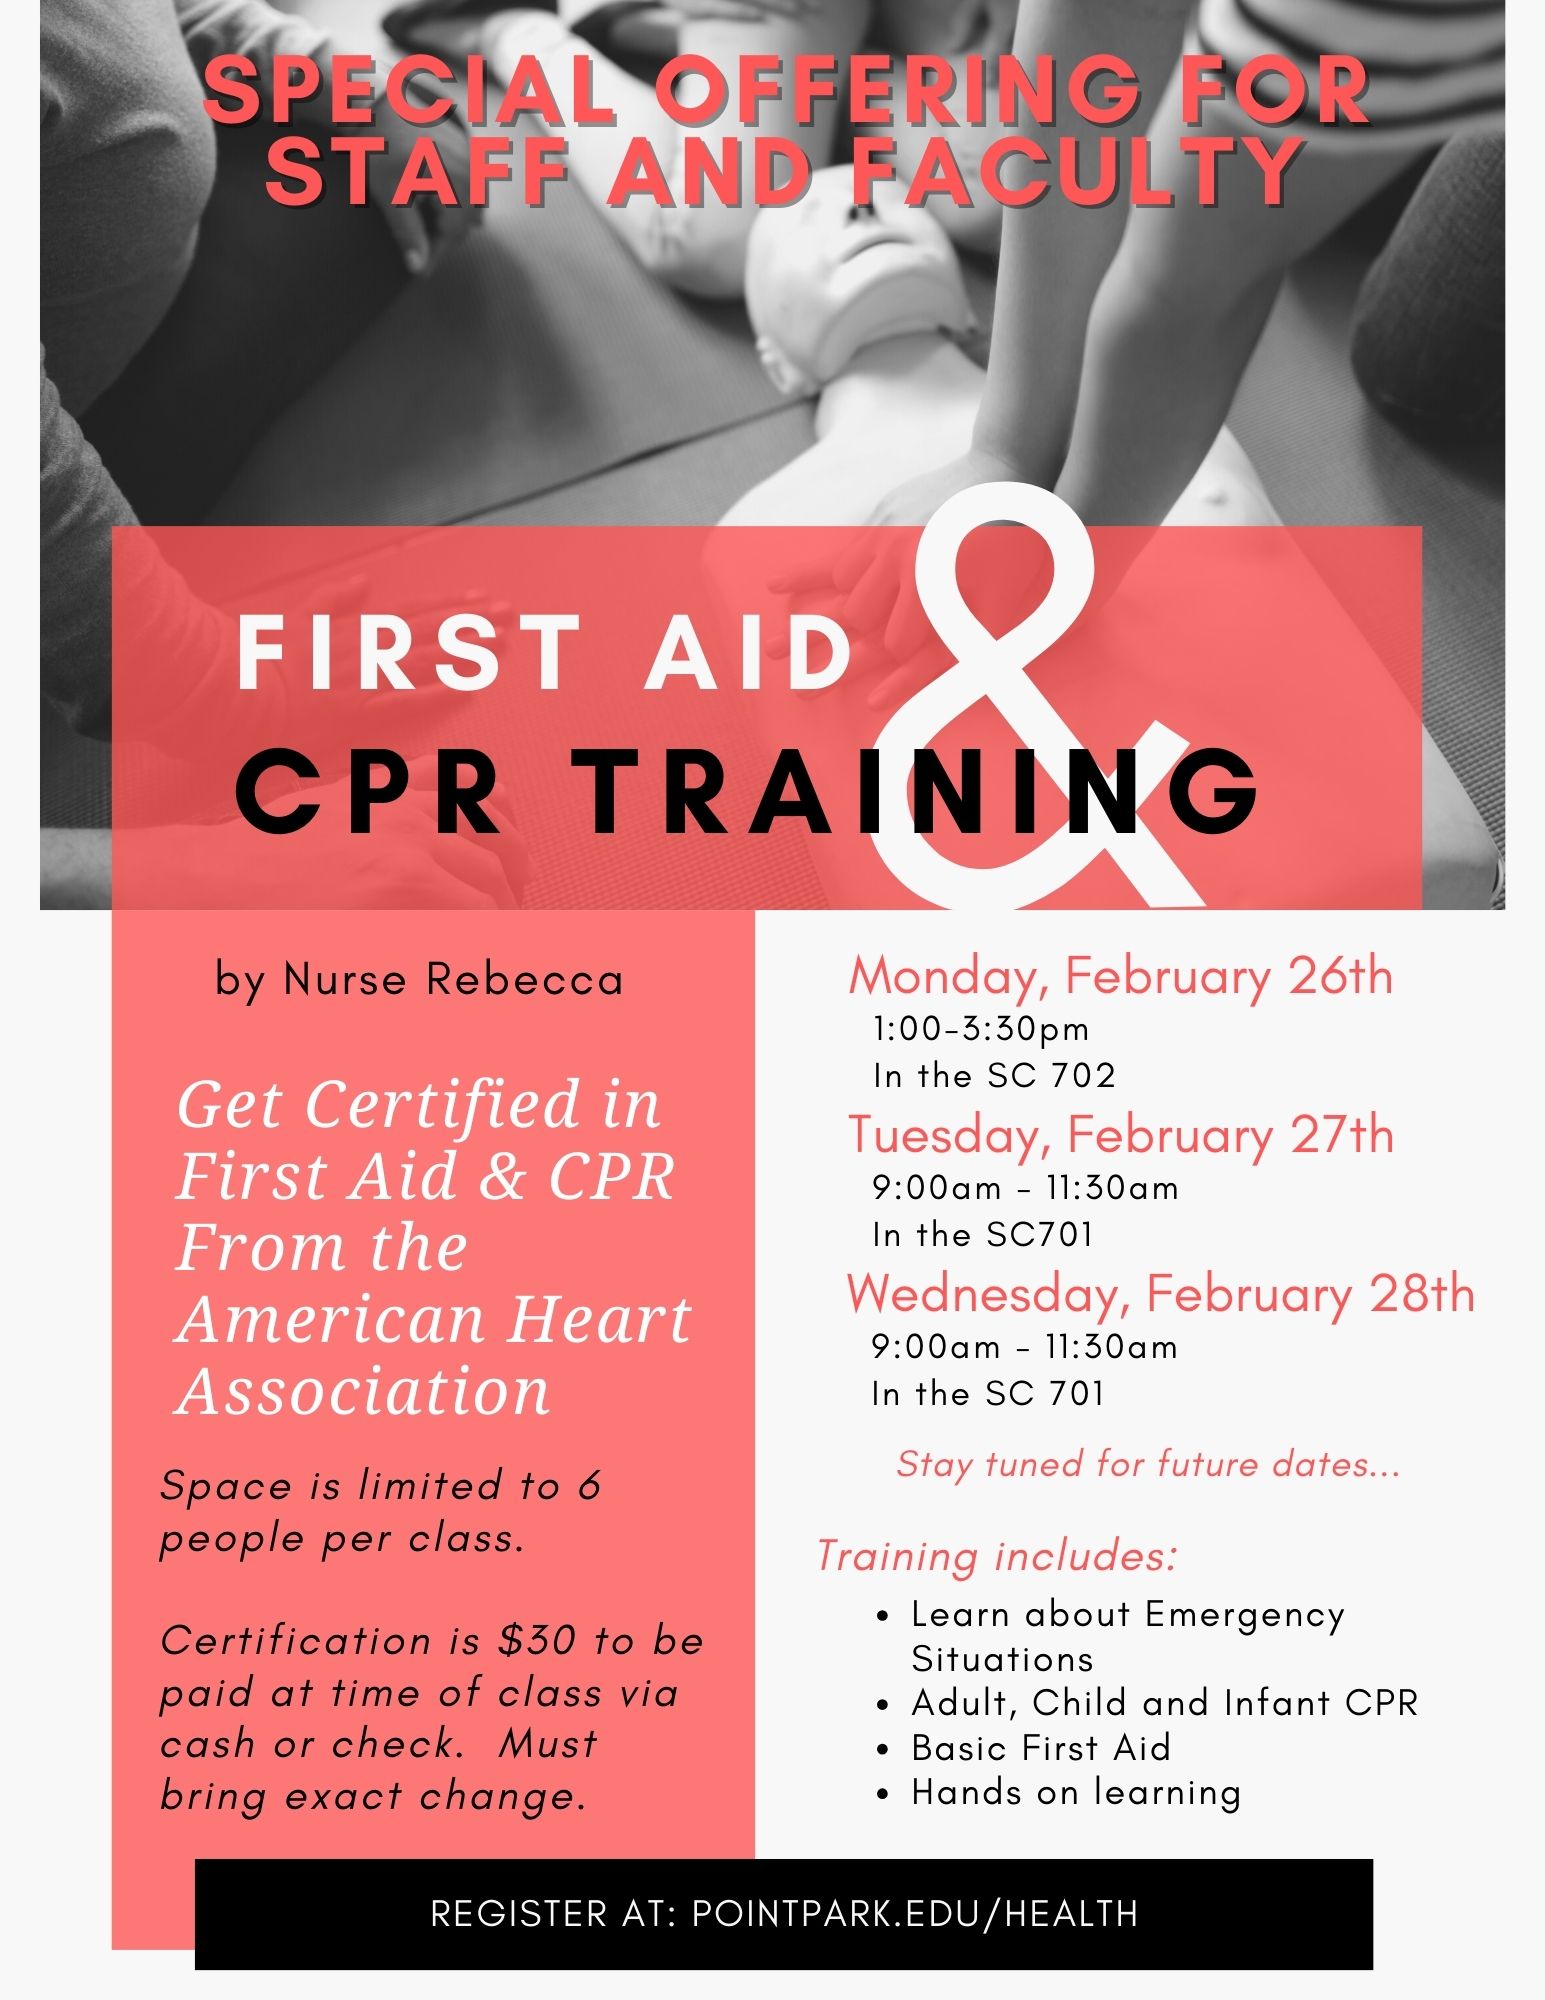 First Aid and CPR Training Flyer Advertising Sessions on Feb. 26, Feb. 27 and Feb. 28,